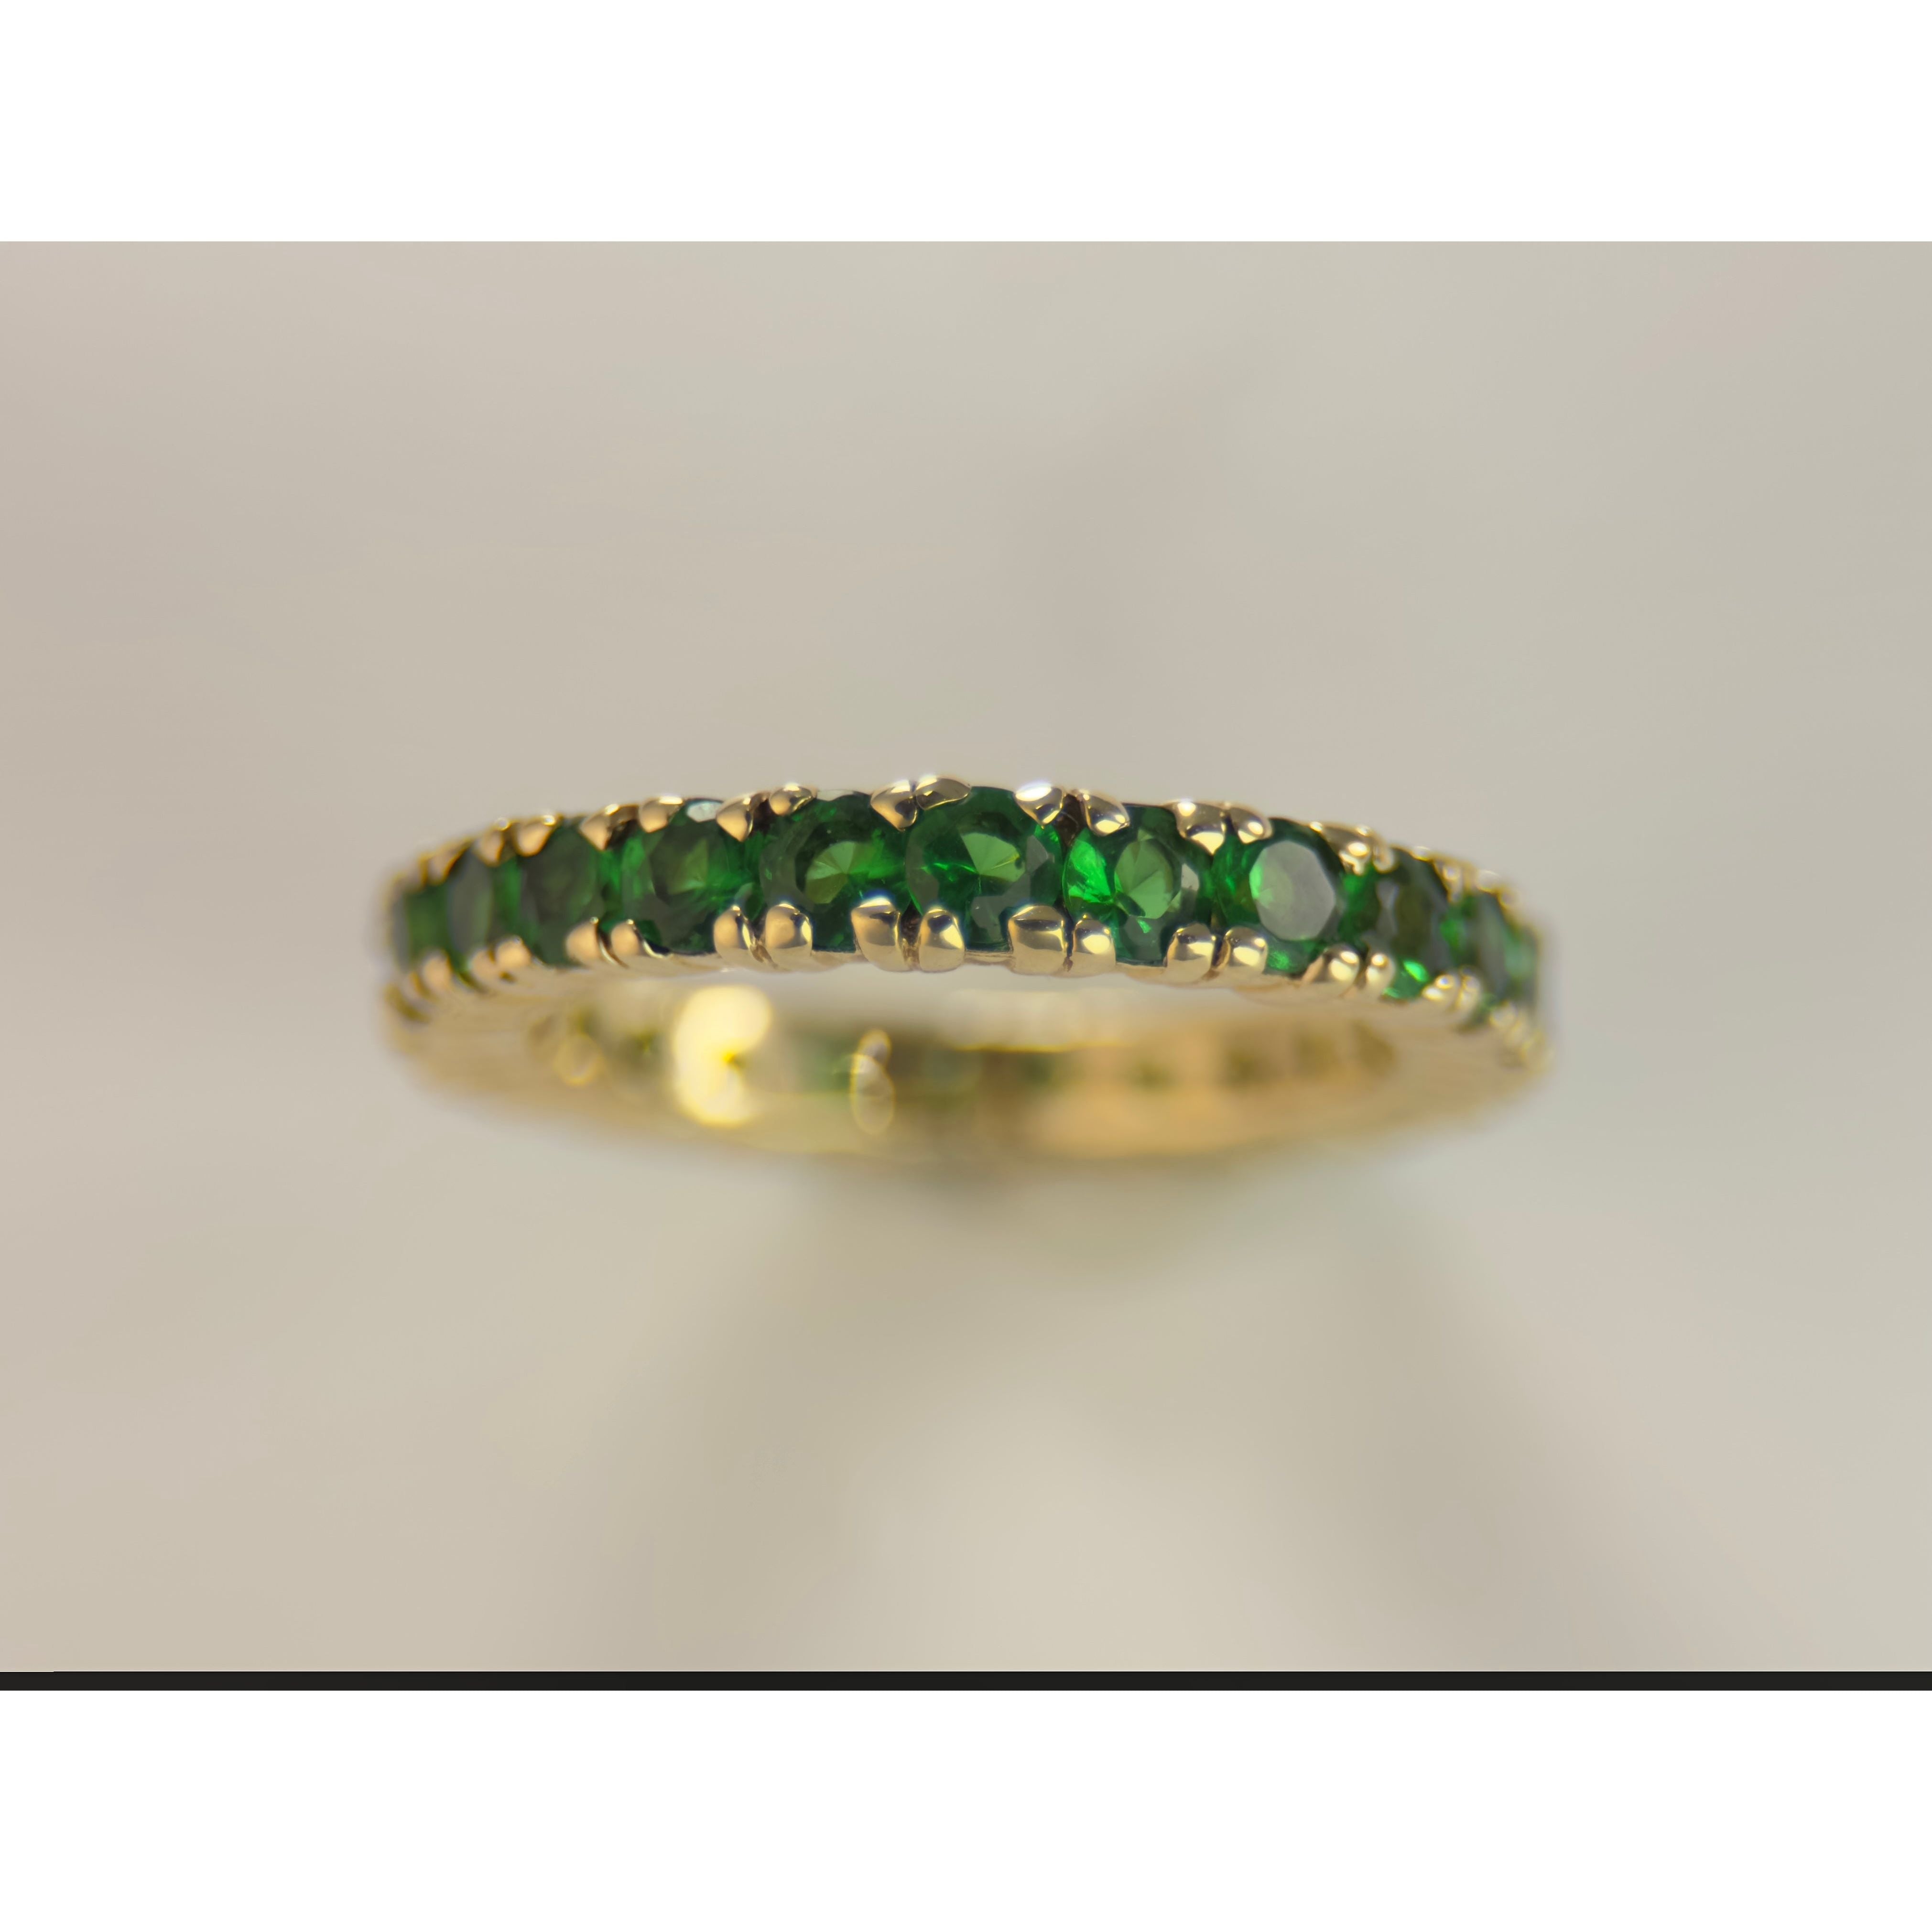 DR2003 - 14K Yellow Gold - Emerald - Ladies Gold Rings - Eternity Band